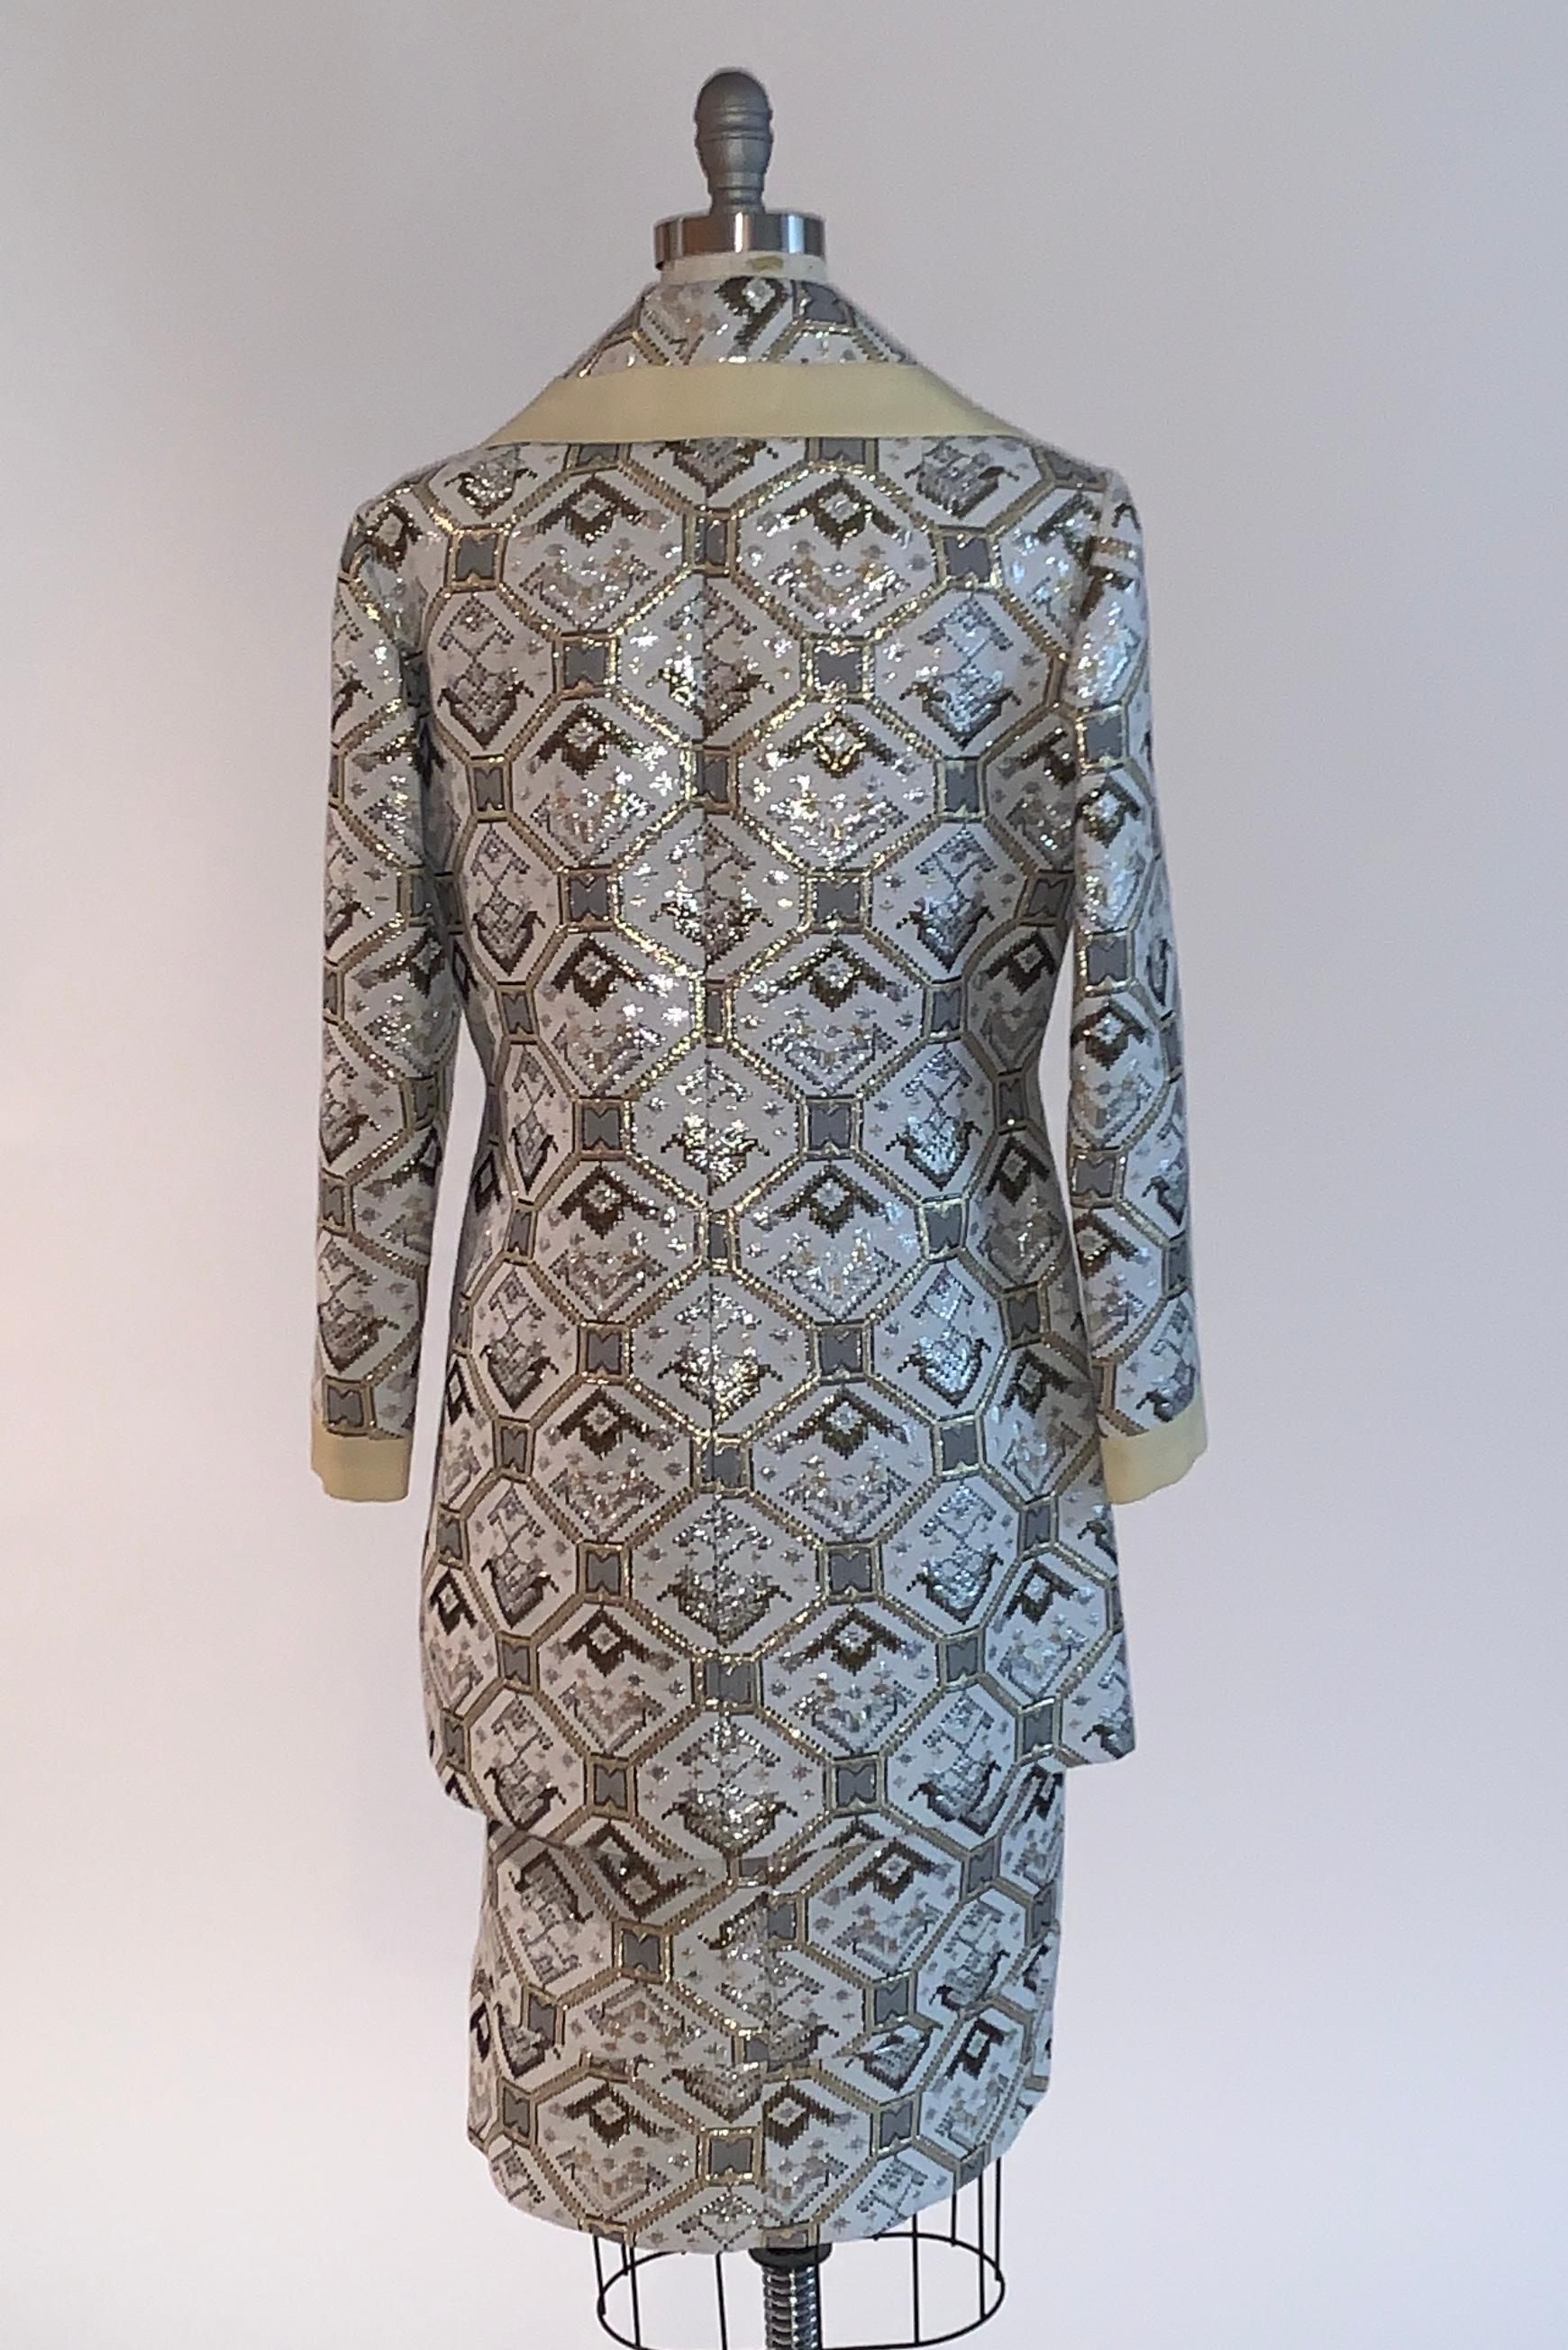 Vintage 1970s Metallic Silver Gold and White Brocade Coat and Dress Set  For Sale 1